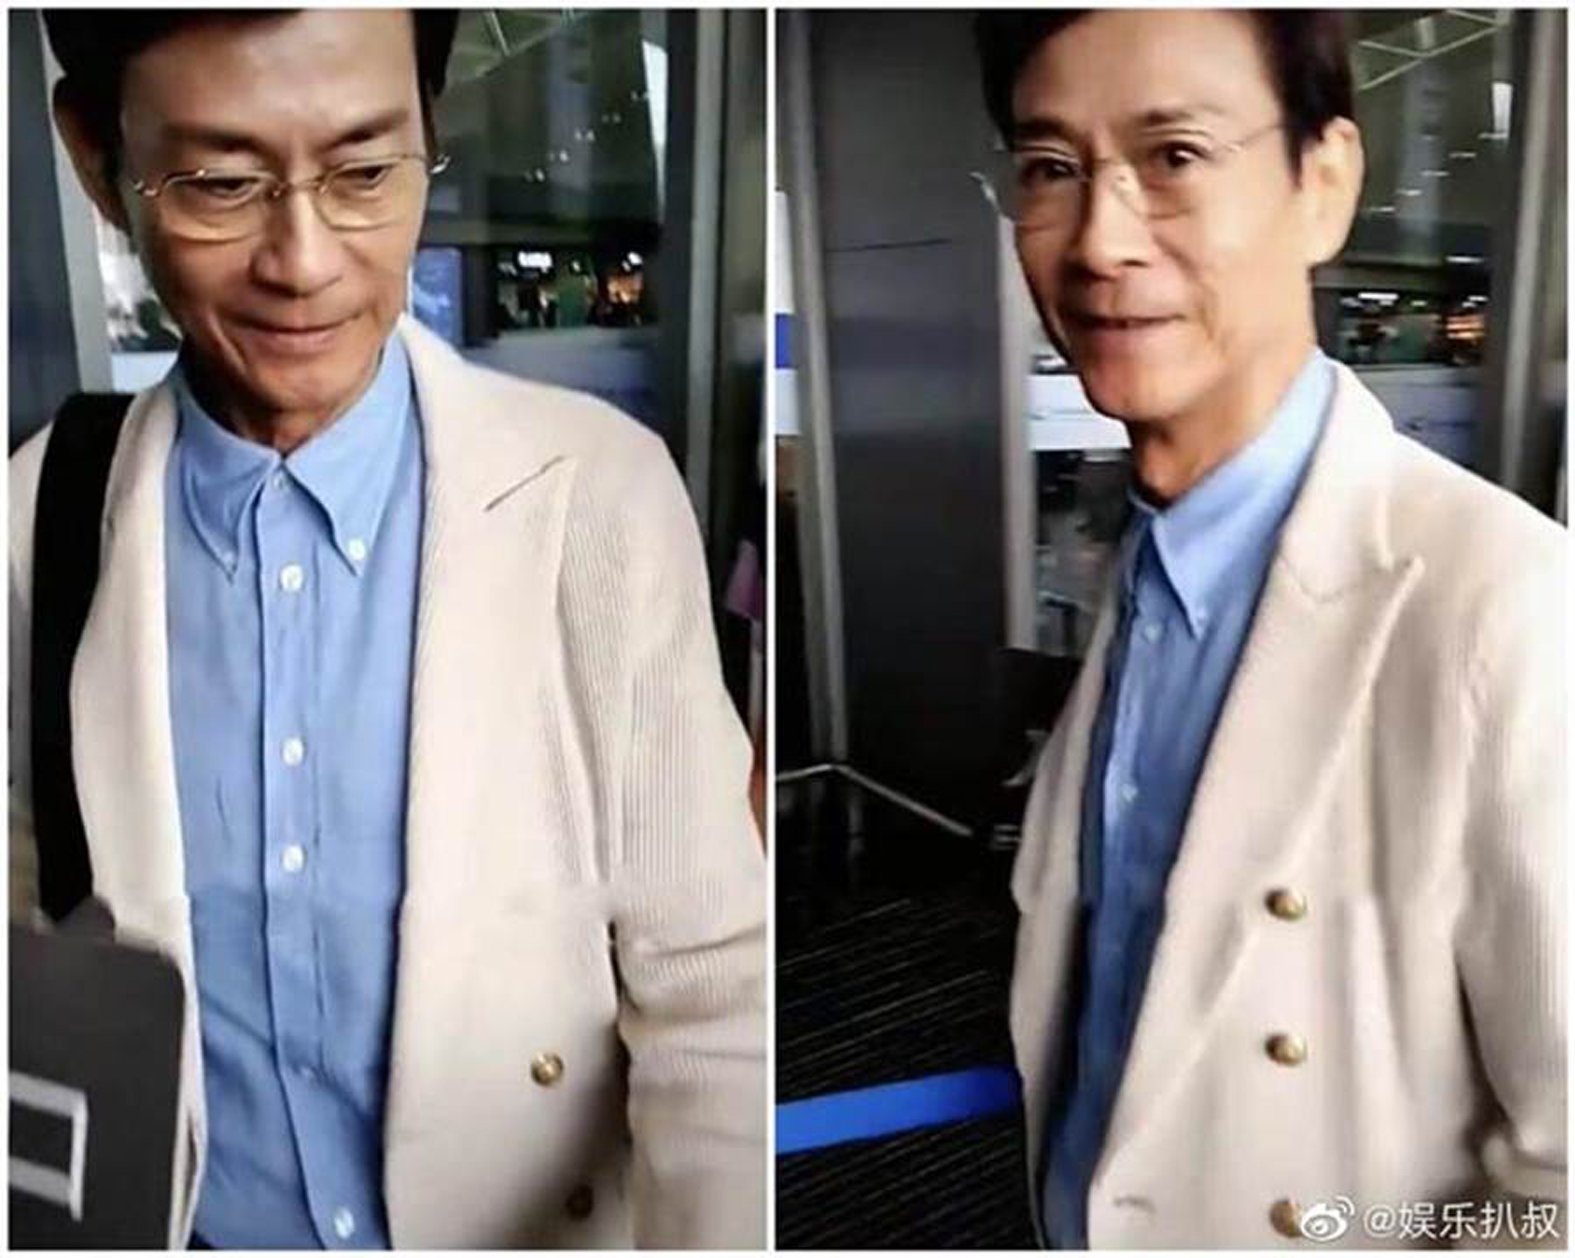 73-Year-Old Adam Cheng Reveals His Secret To Looking Youthful - 8Days